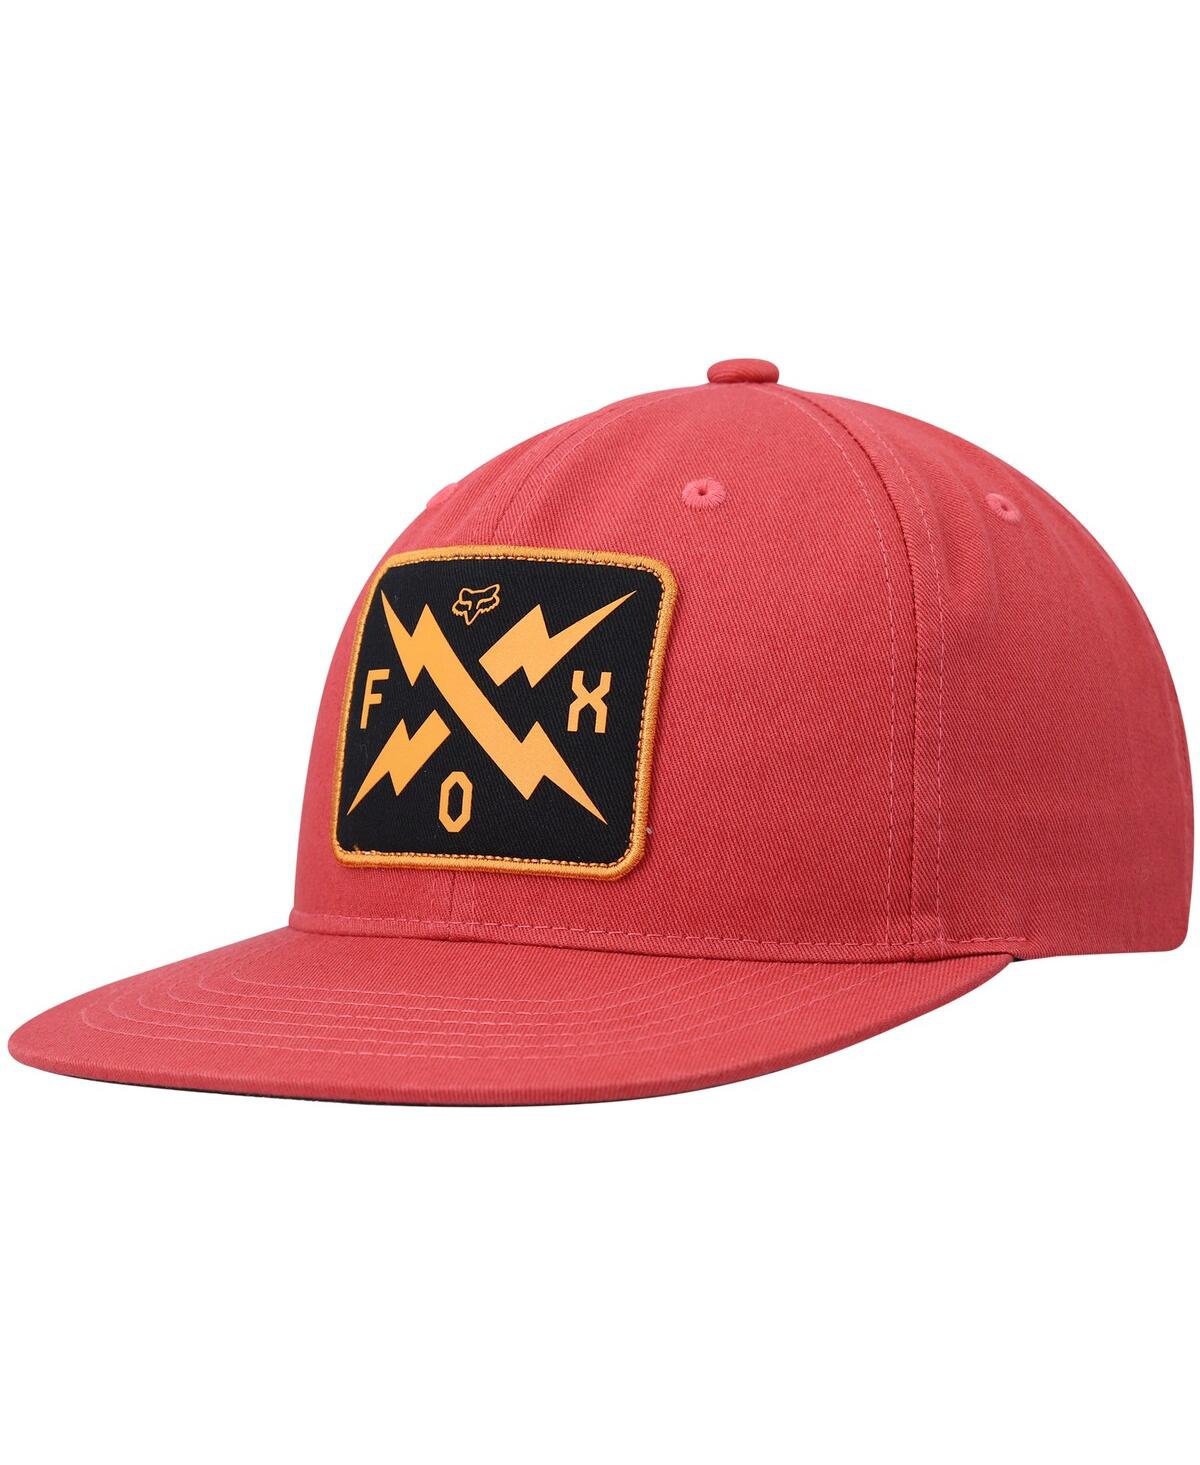 Fox Men's  Red Calibrated Snapback Hat